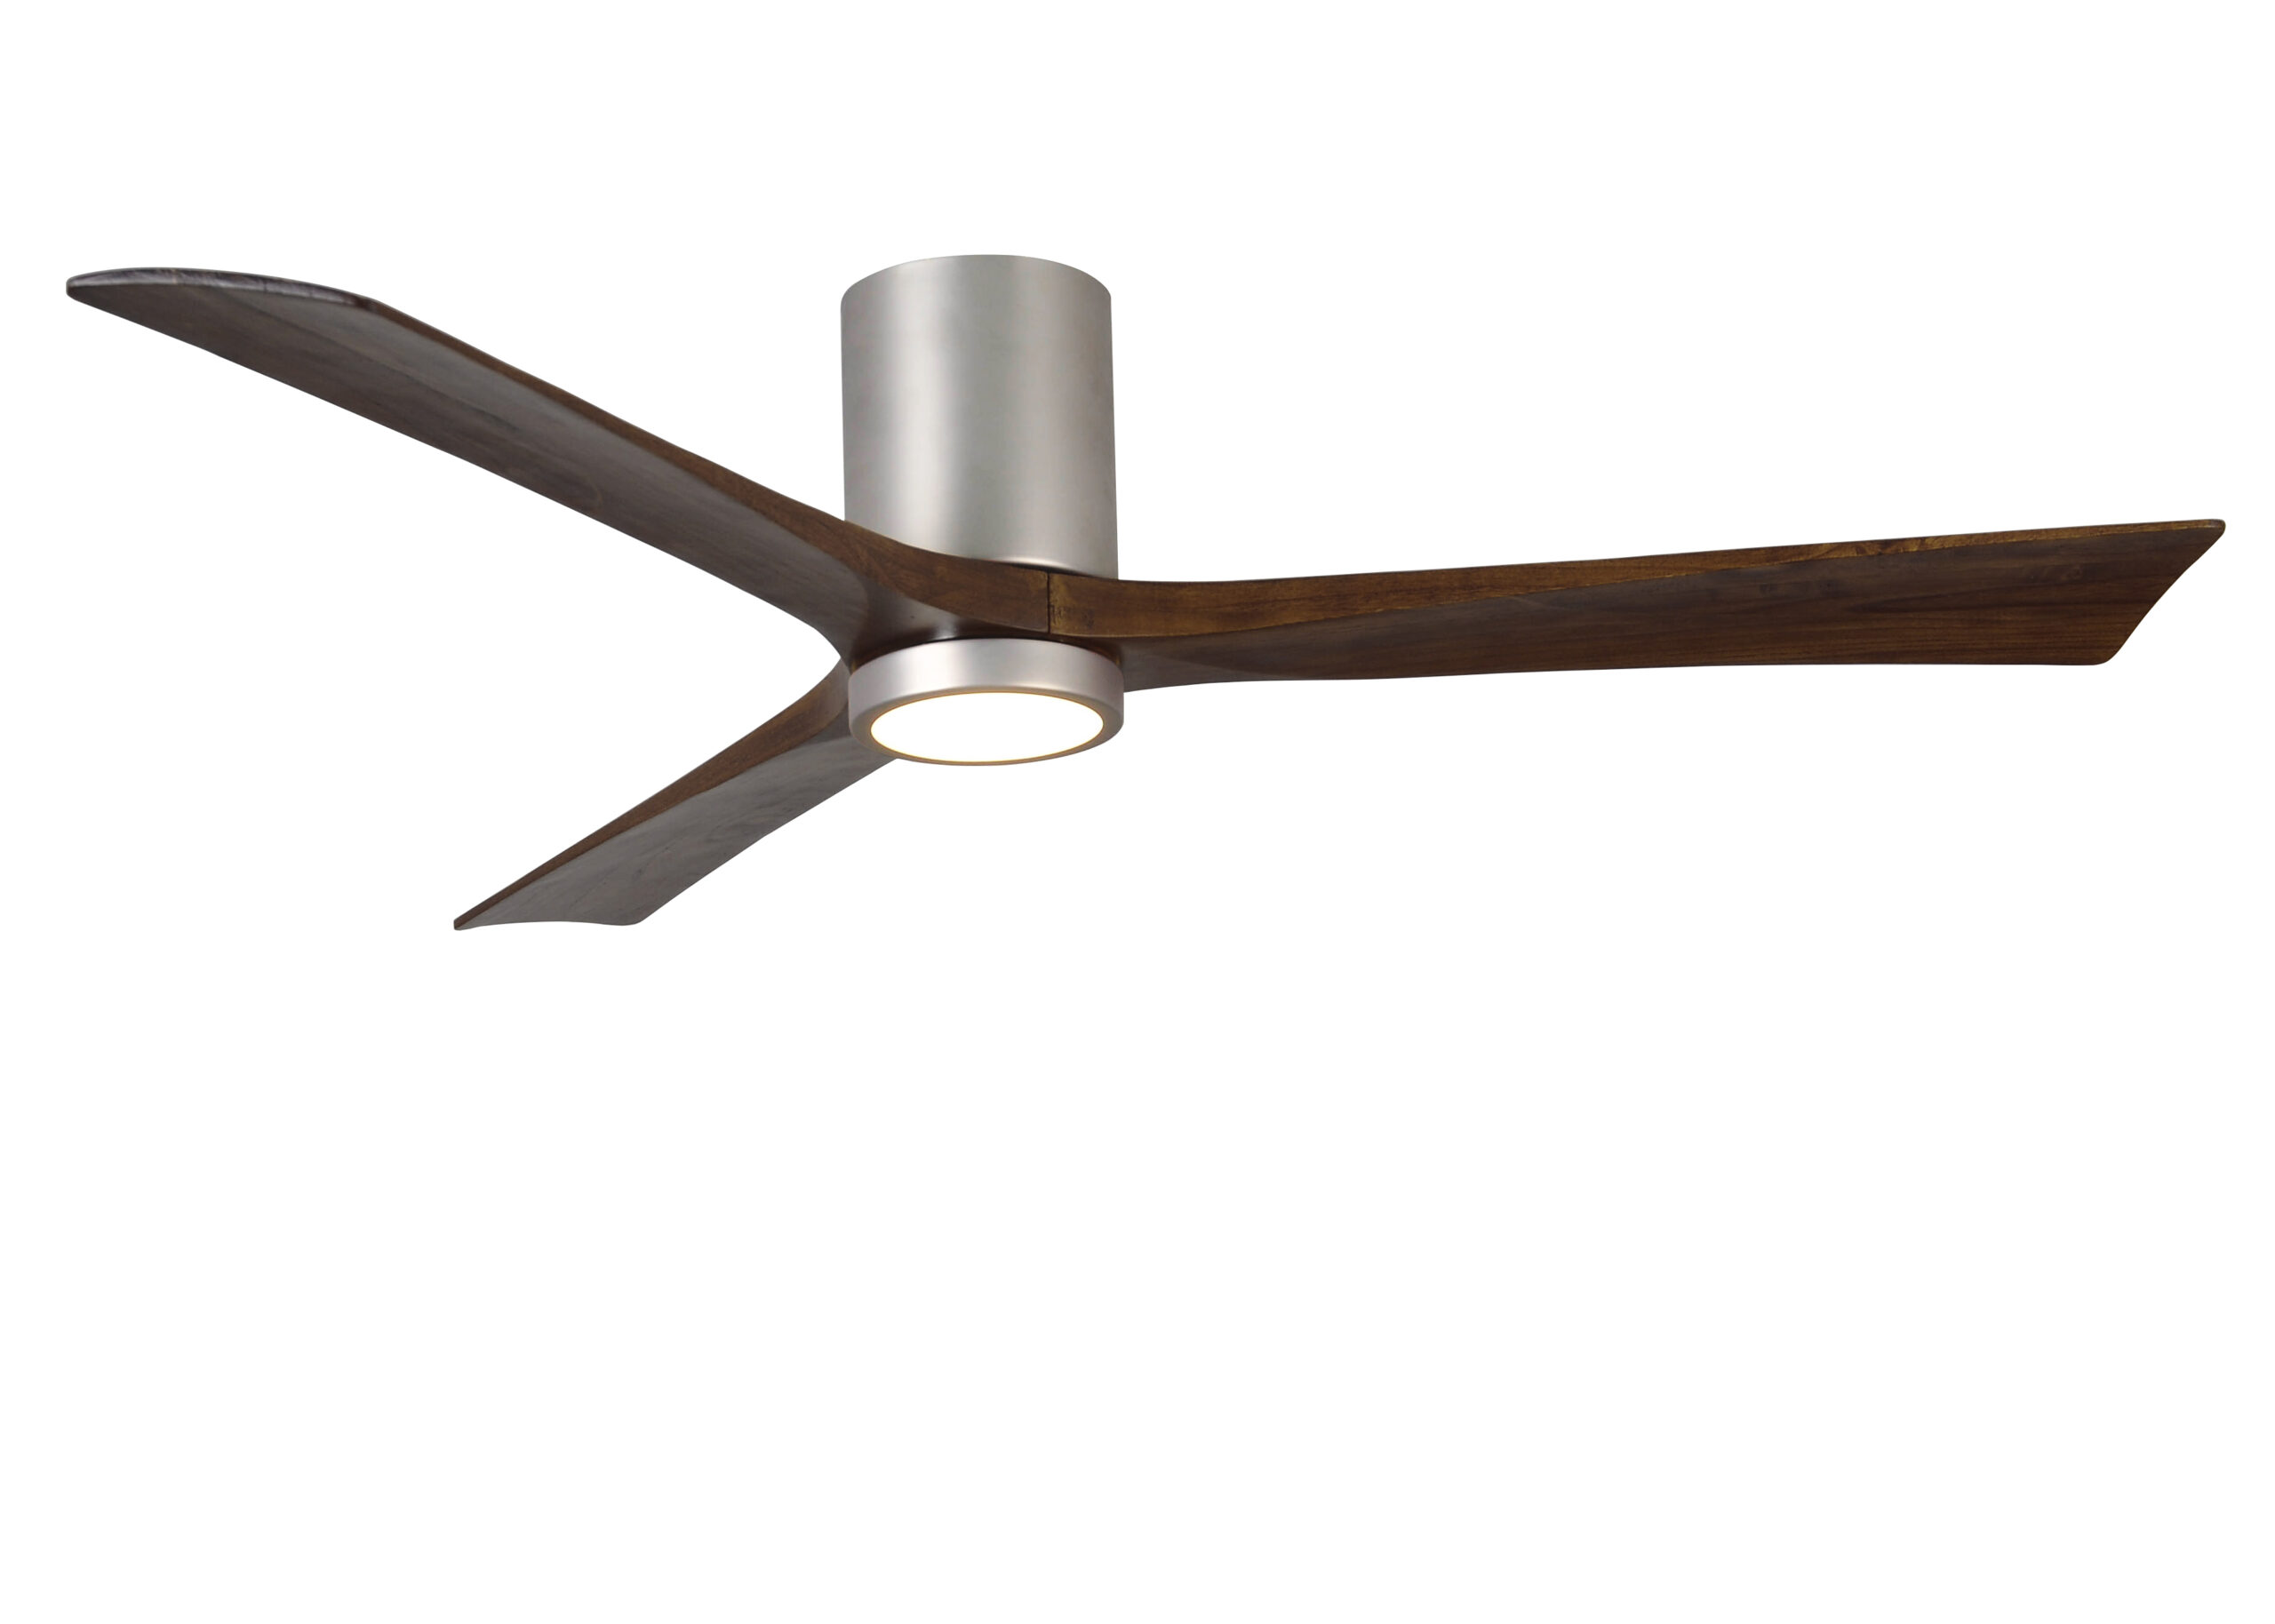 Irene-3HLK Ceiling Fan in Brushed Nickel Finish with 60